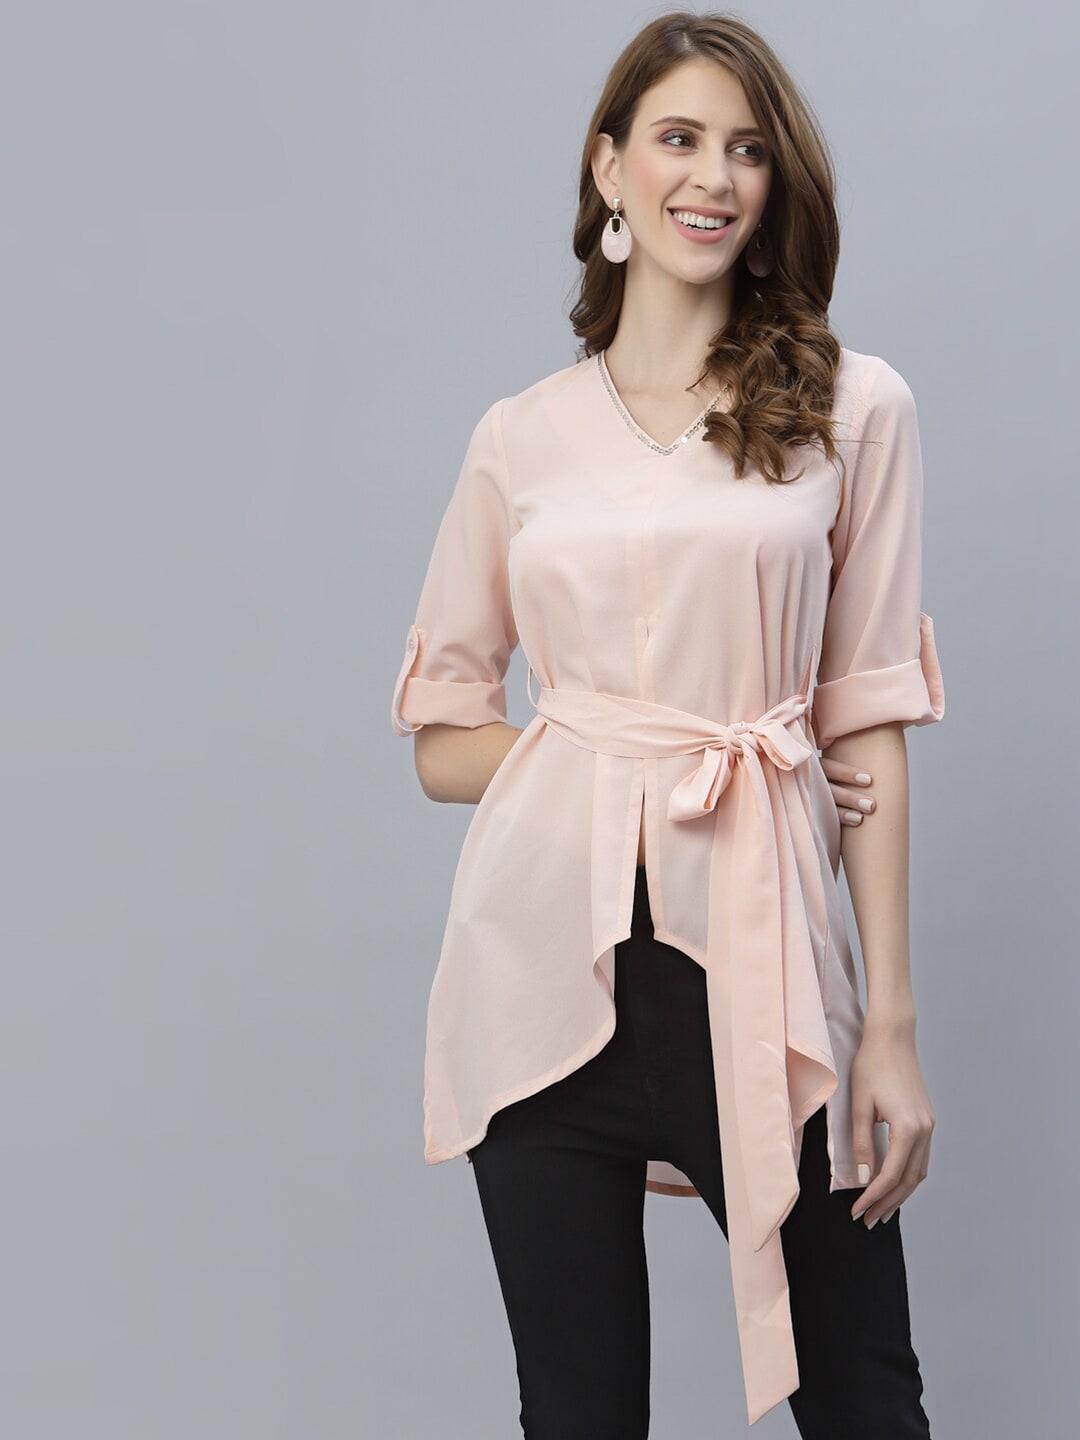 raassio women peach-coloured roll-up sleeves crepe longline top